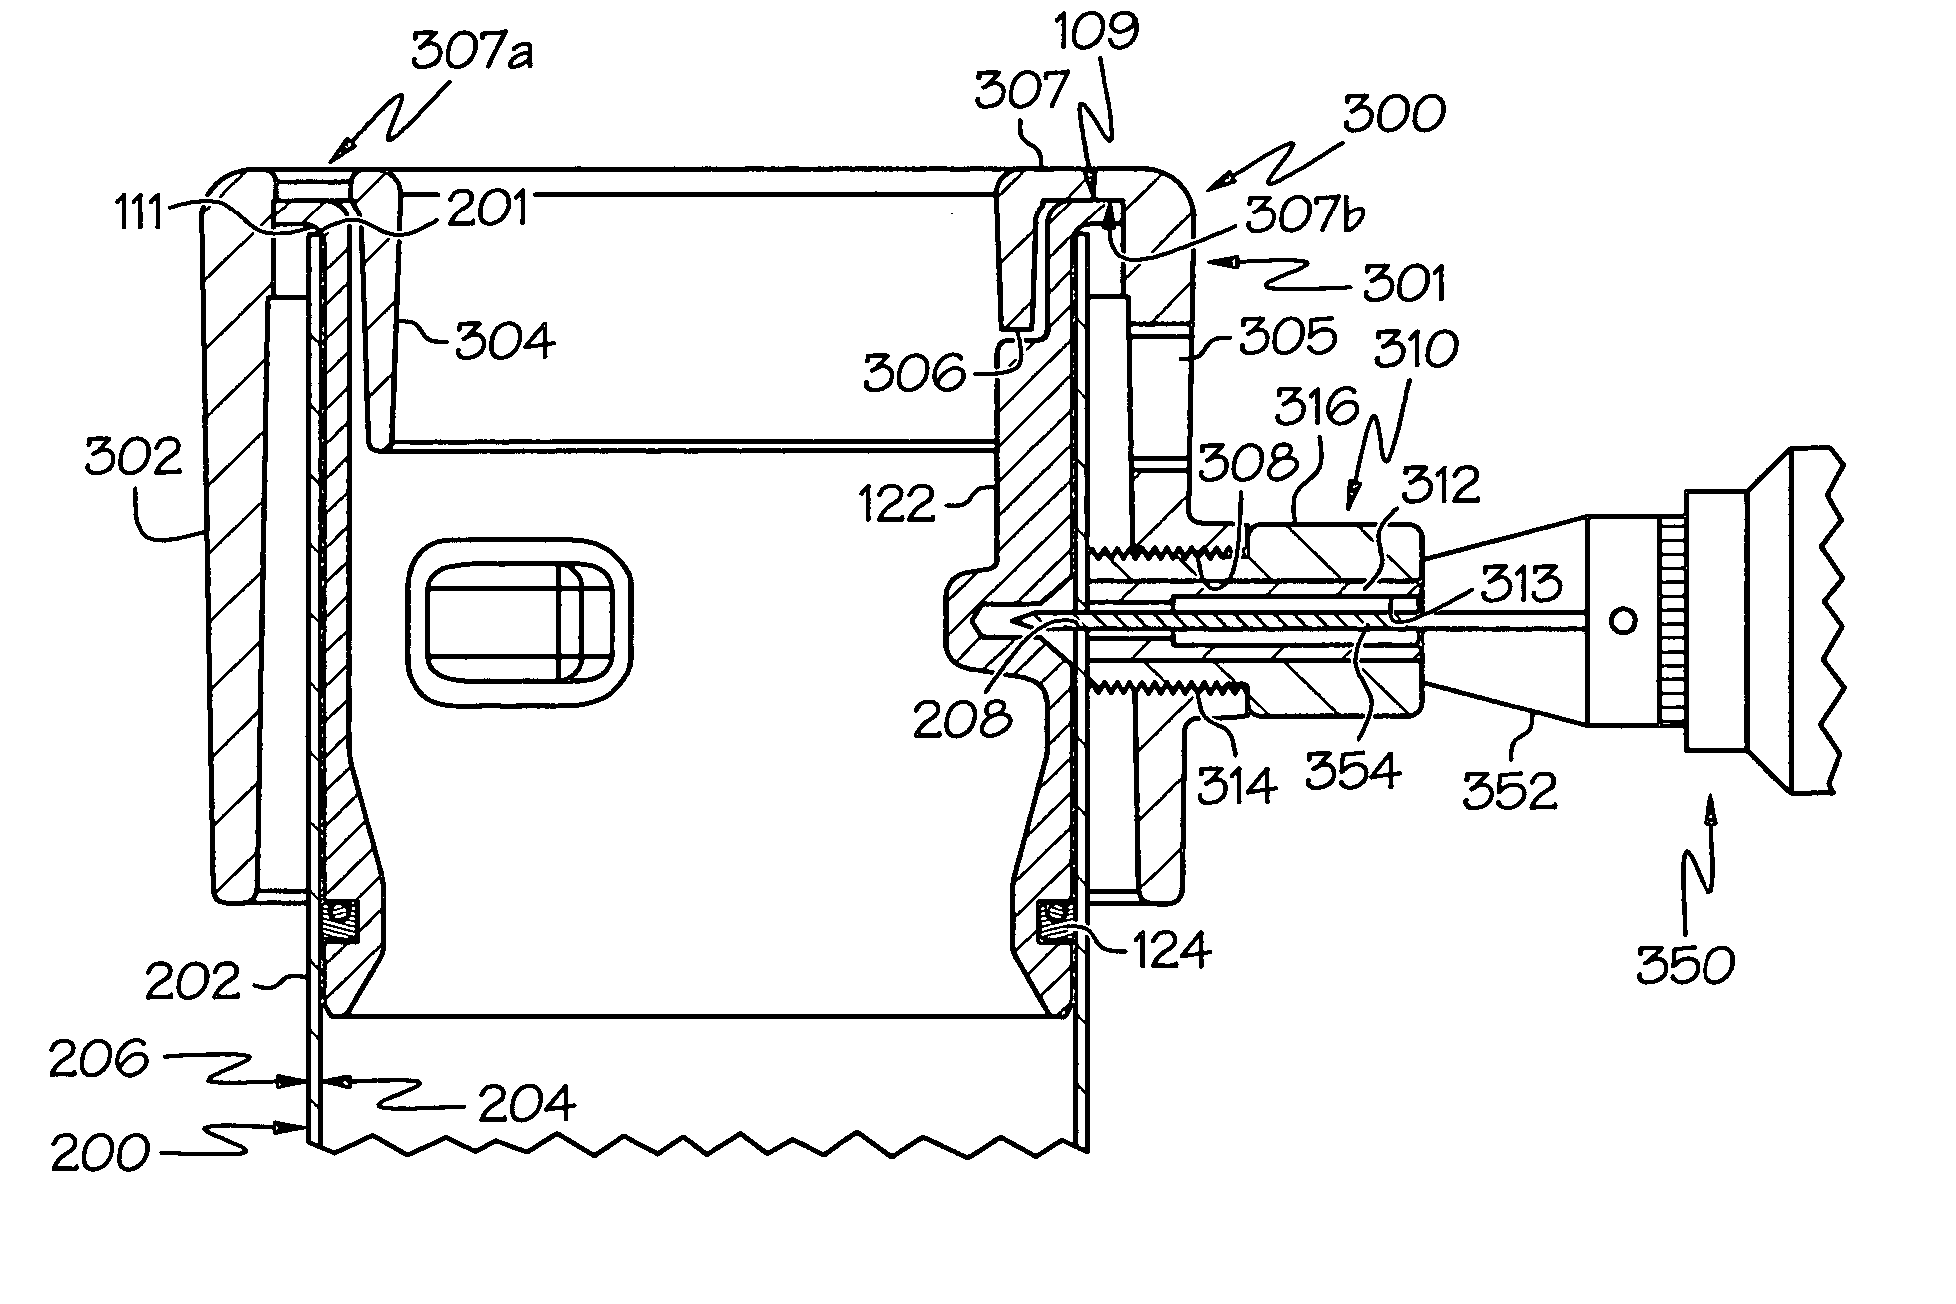 Drop tube inserts and apparatus adapted for use with a riser pipe